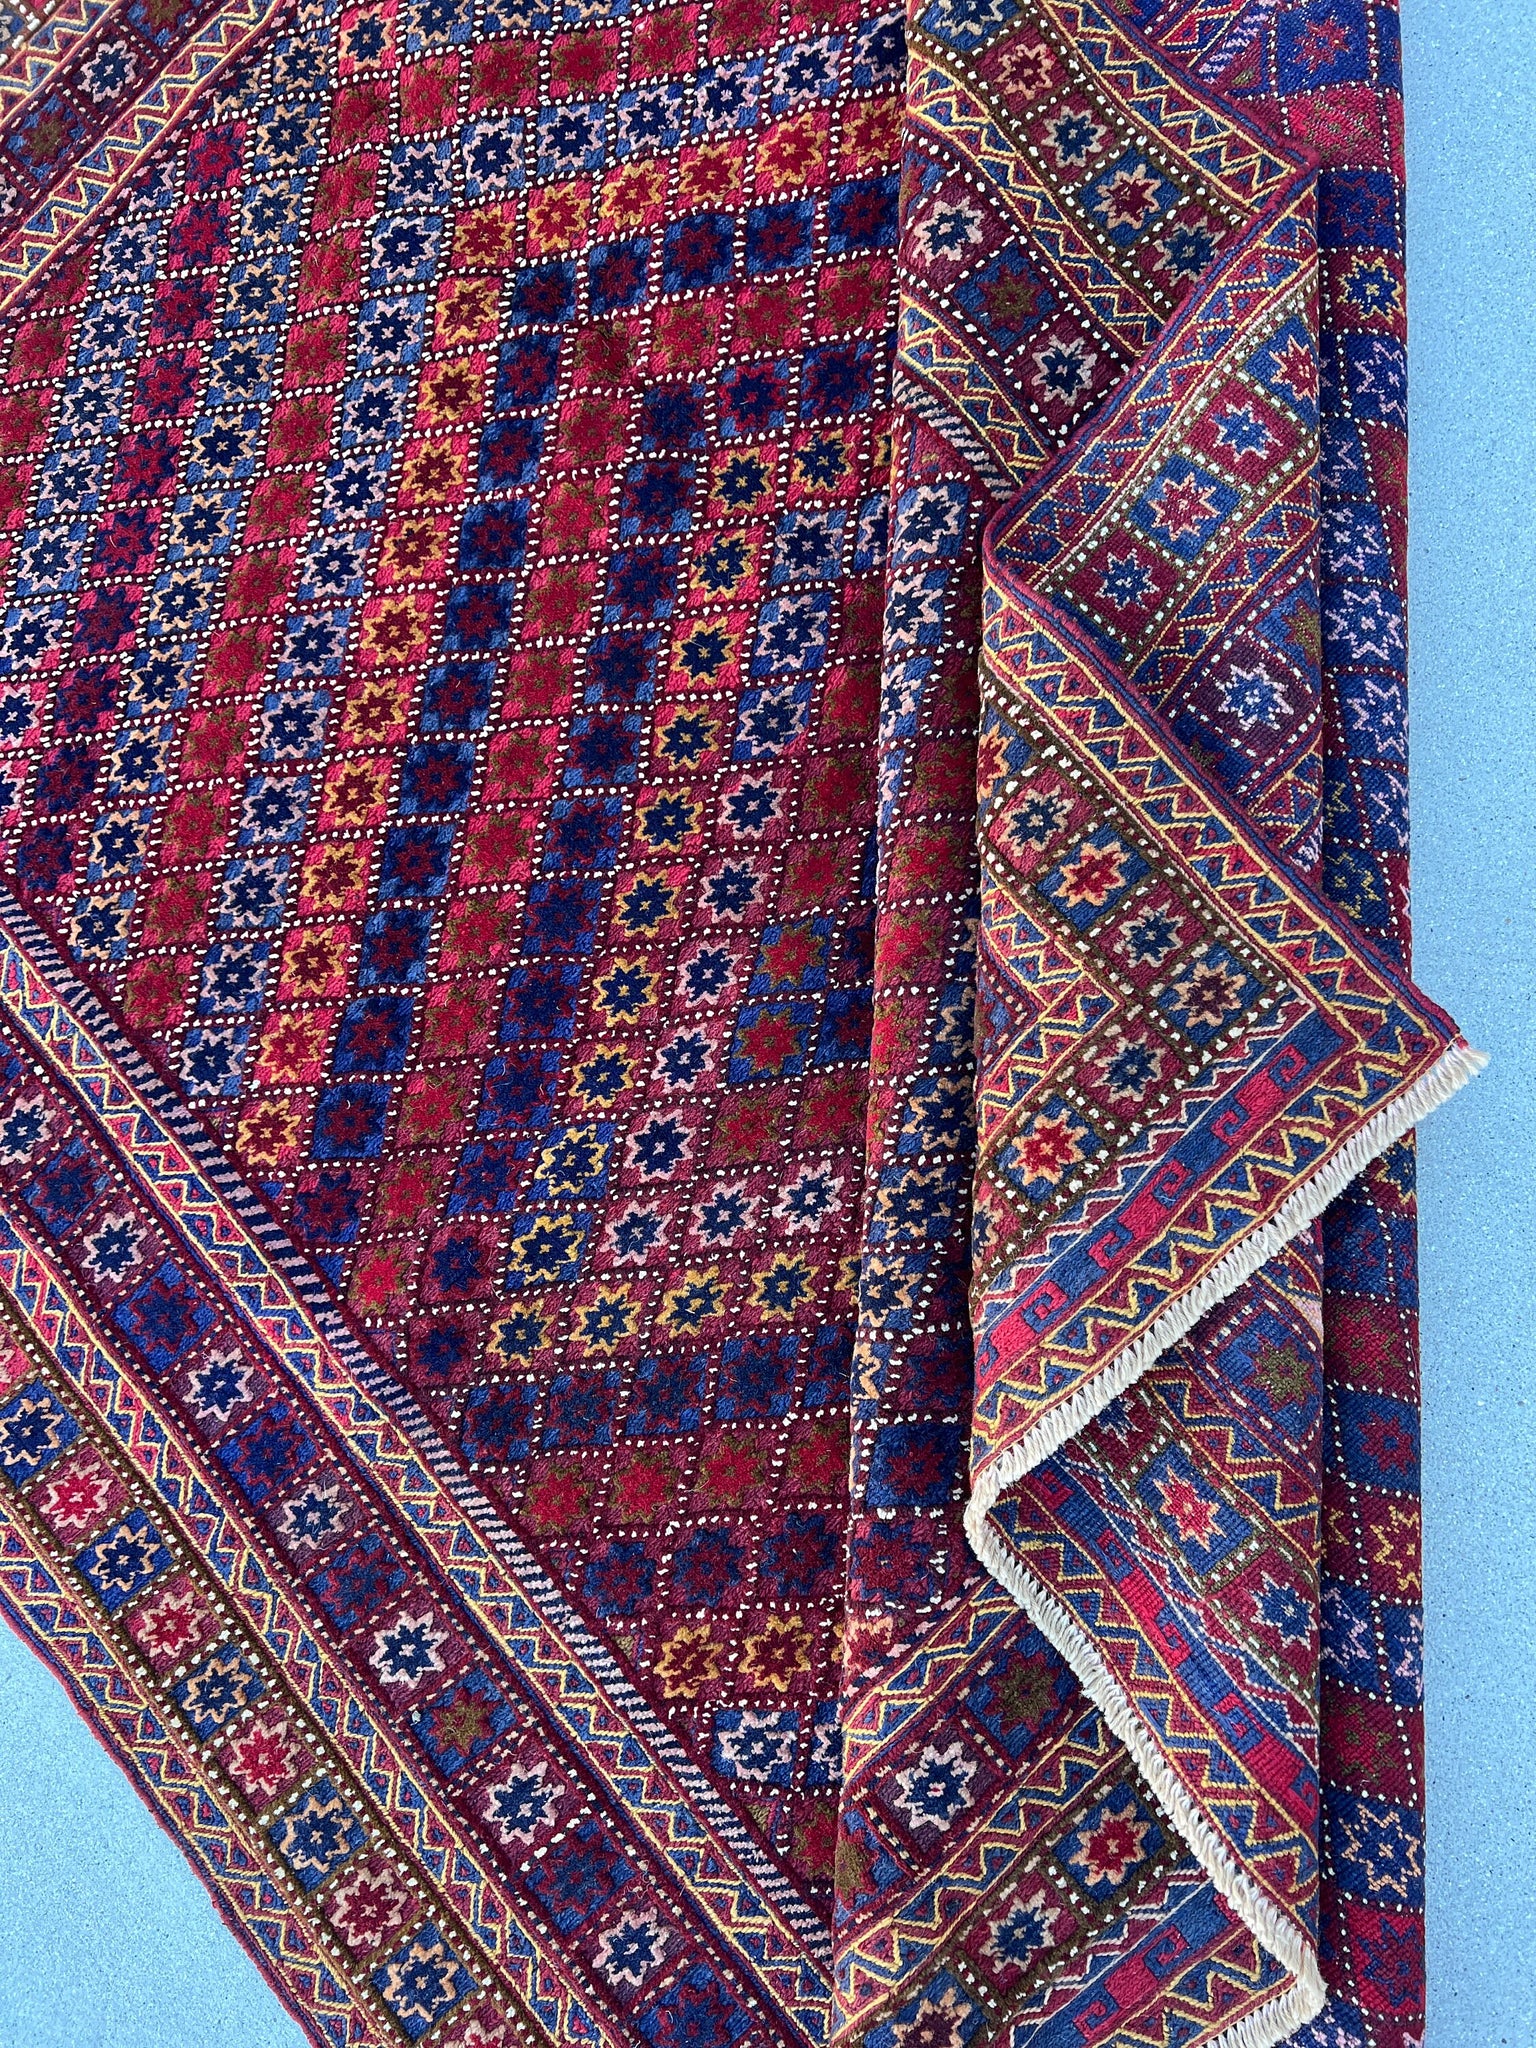 5x6 (150x180) Handmade Afghan Kilim Rug | Navy Blue Crimson Red Gold Mauve Mustard Yellow Brick Red Ivory Taupe Geometric Hand Knotted Wool